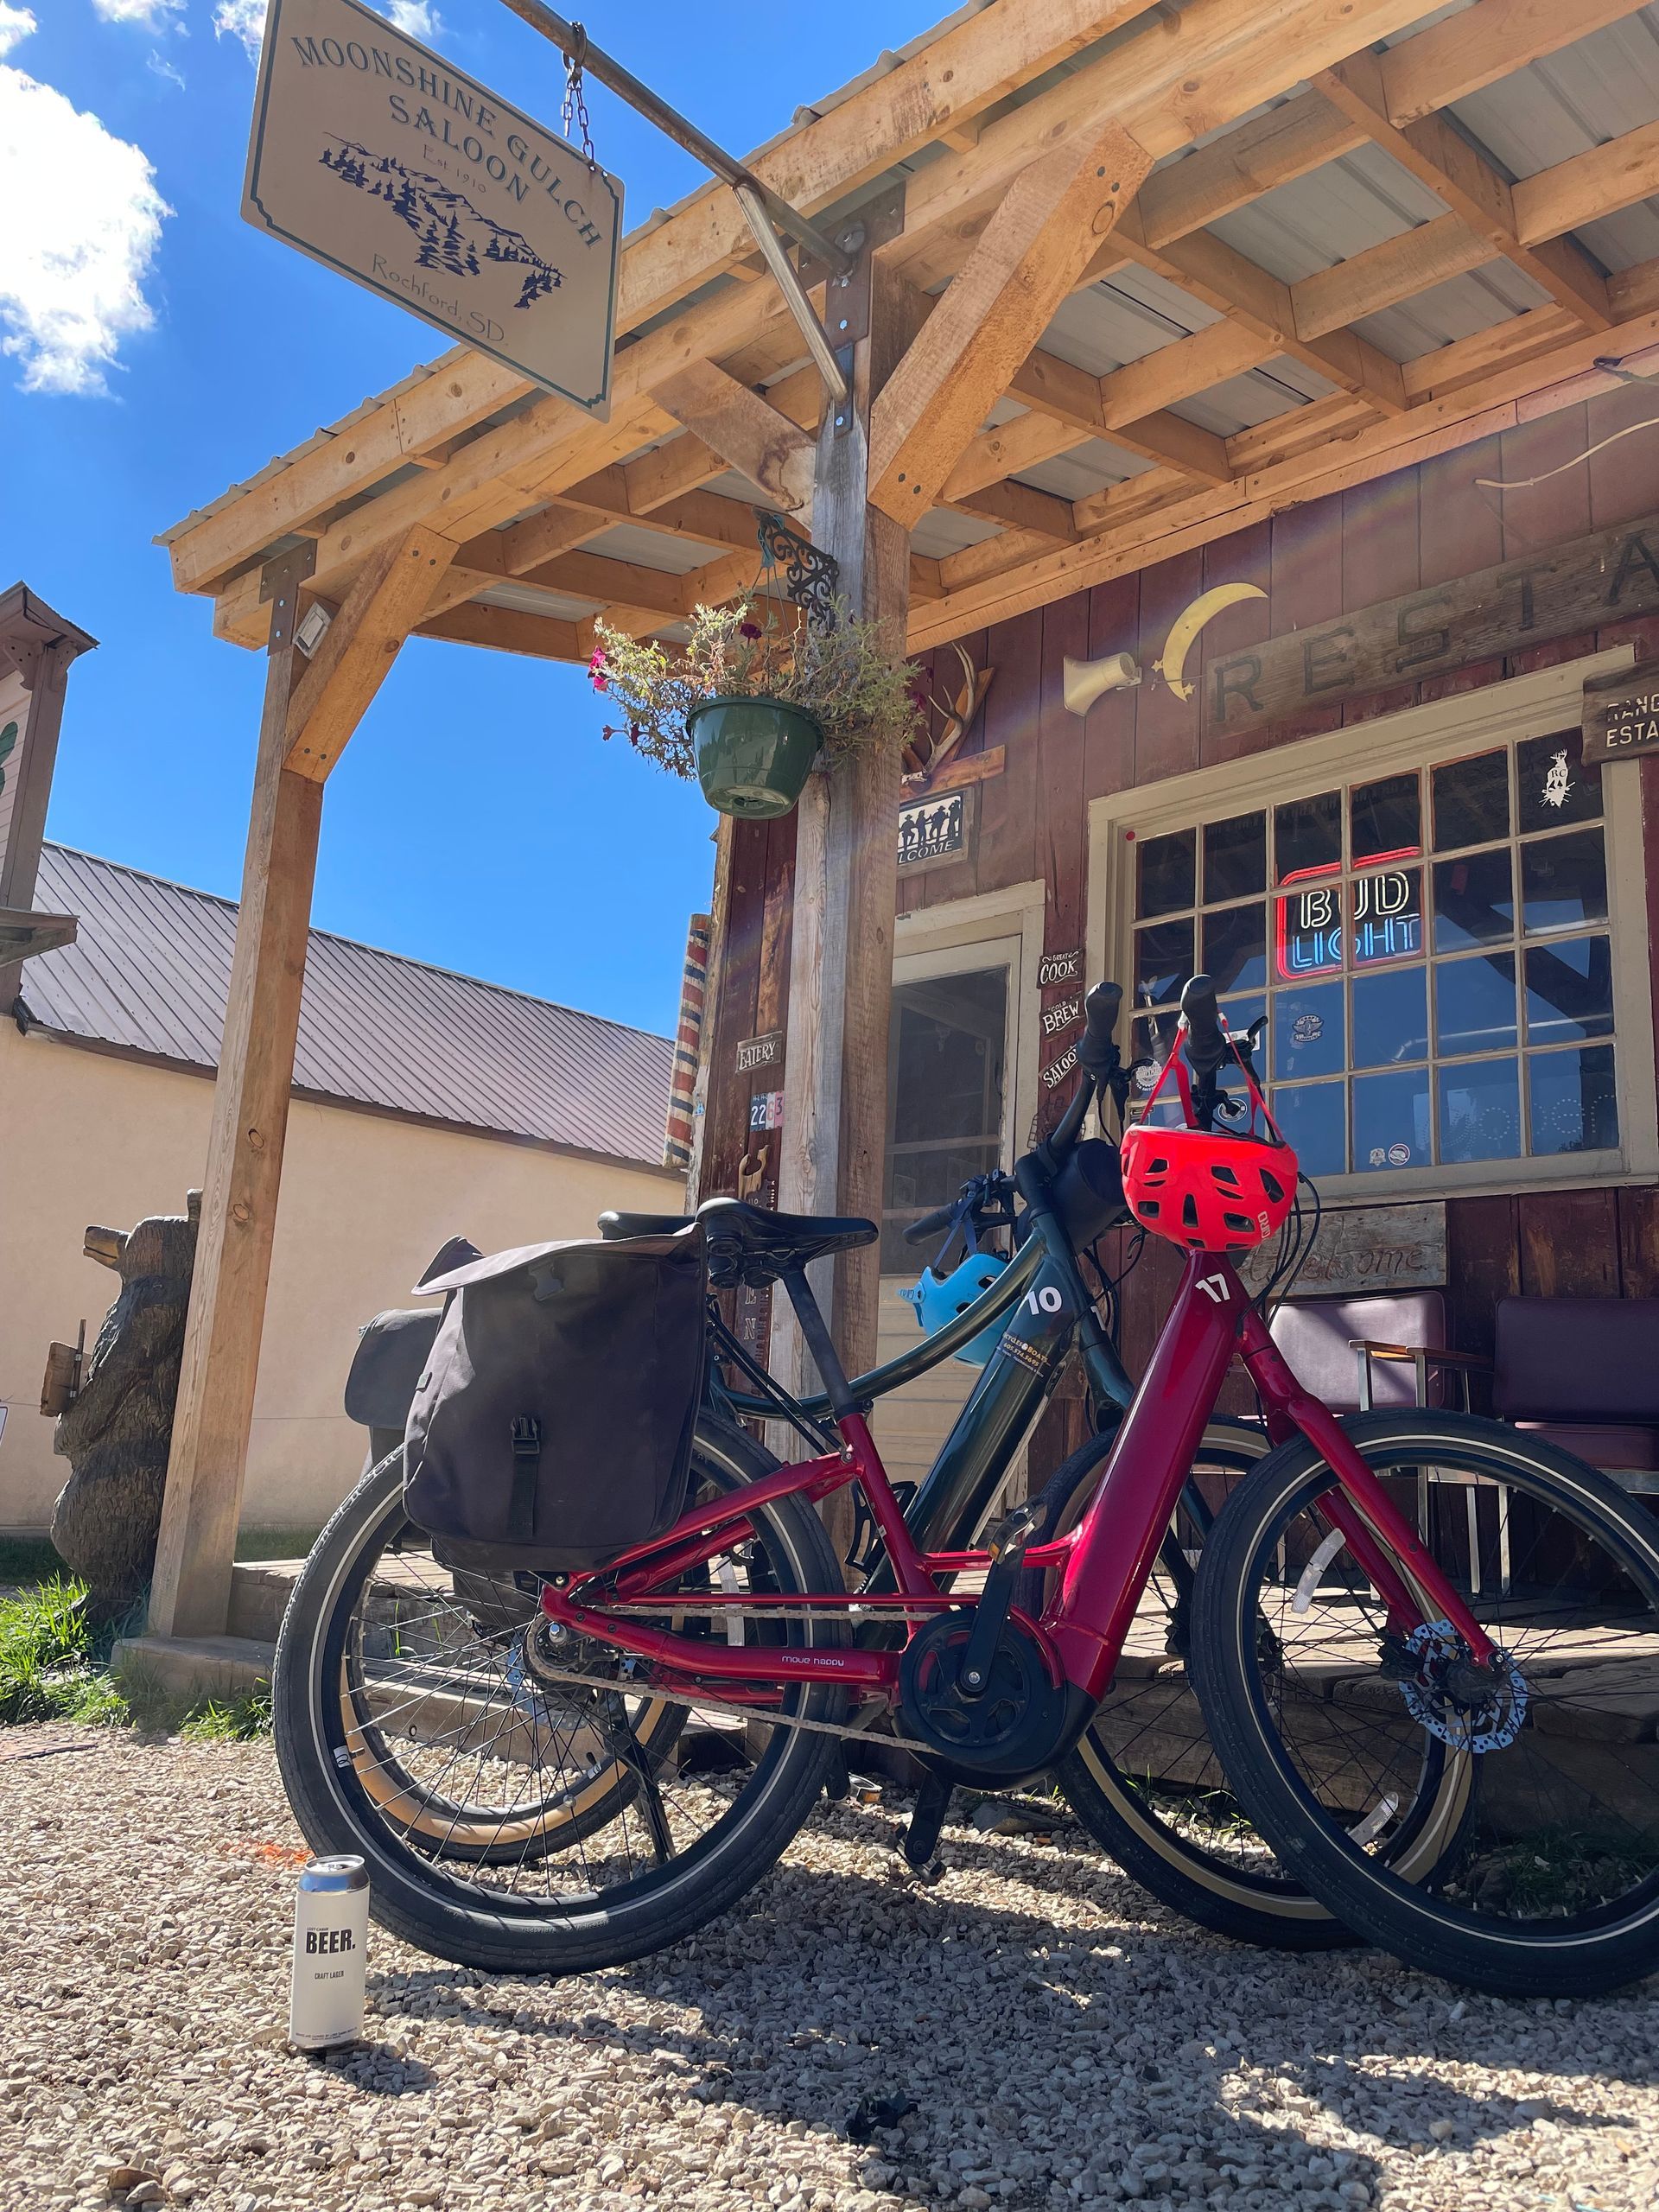 two bicycles are parked in front of Moonshine Gulch Saloon.